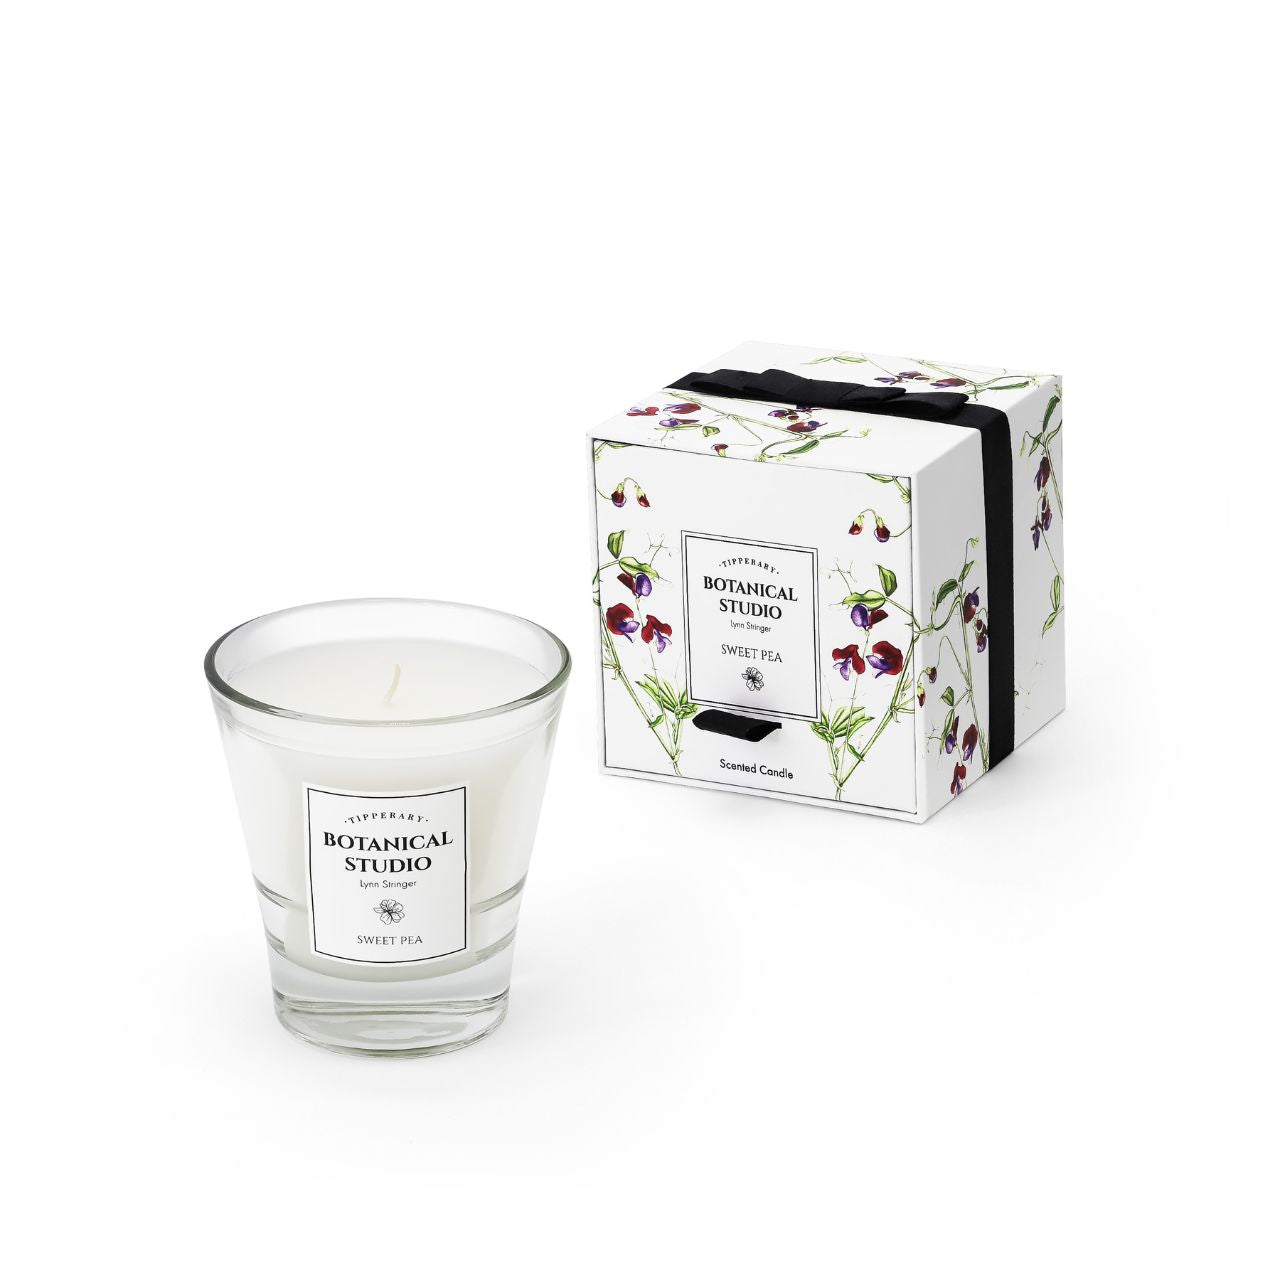 Botanical Studio Candle - Sweet Pea by Tipperary  Treat yourself with a fresh and floral fragrance of beautiful sweet pea blended with a base of precious woods. This scent will uplift and refresh any room.